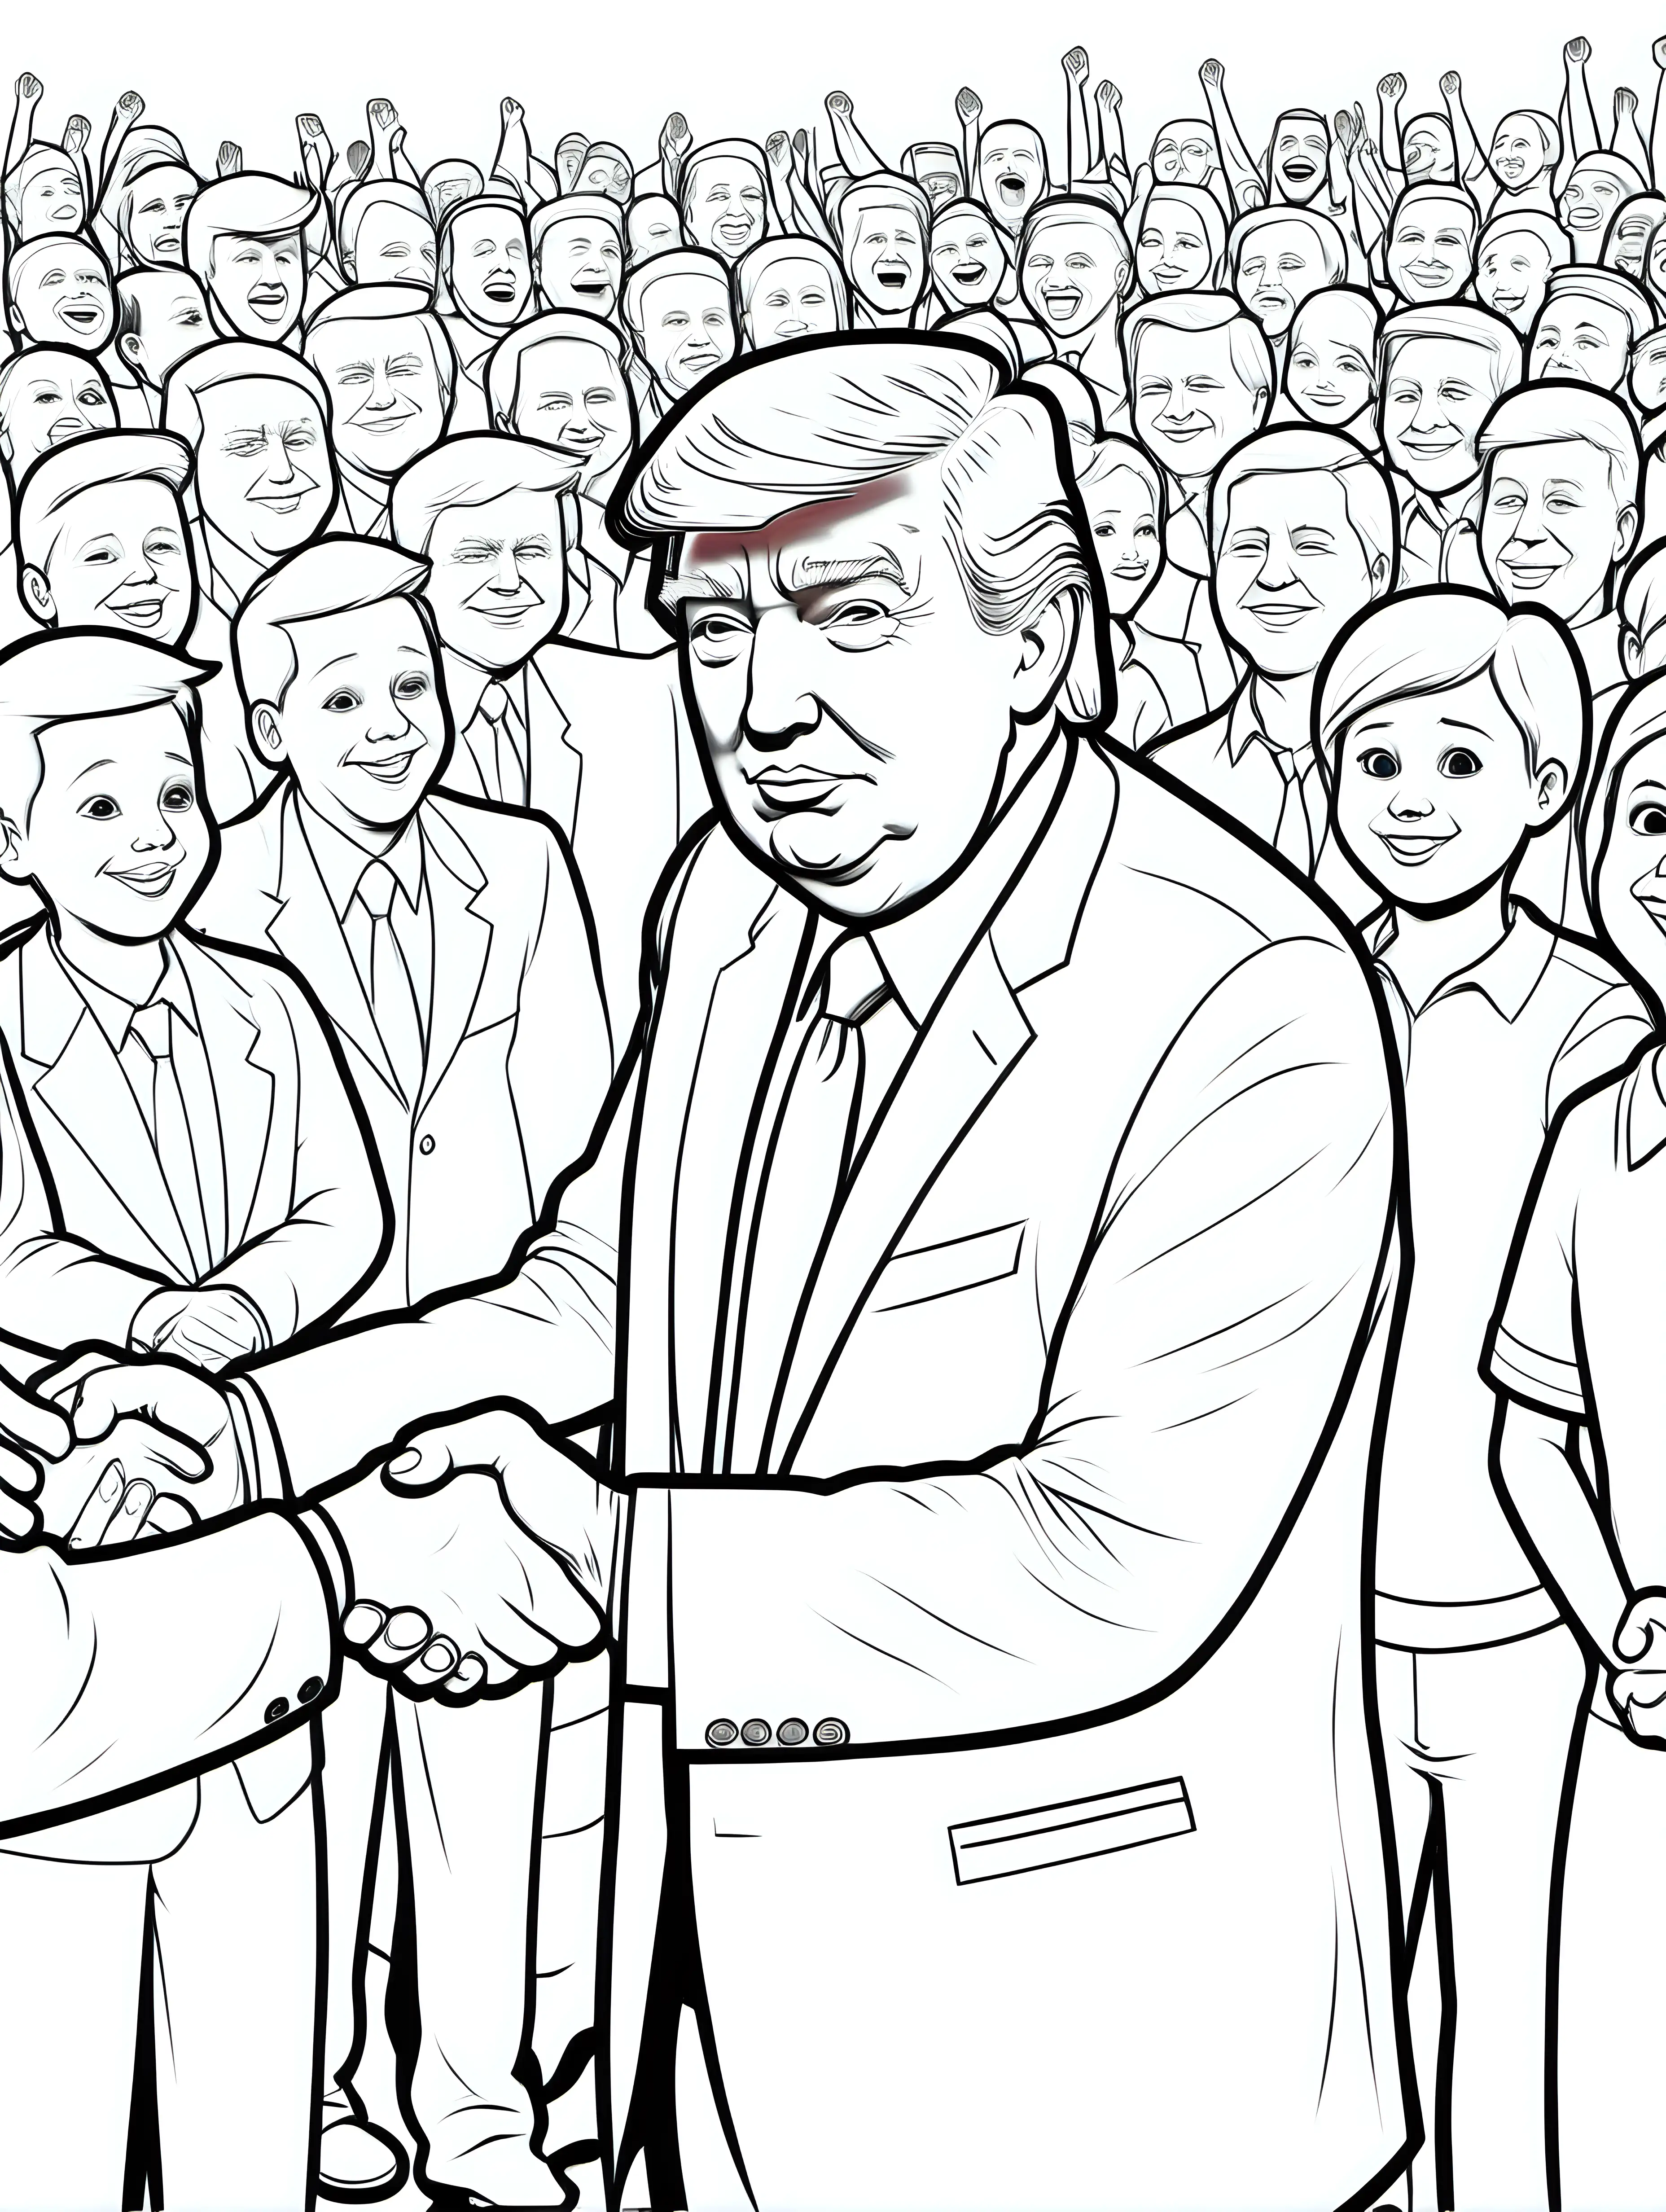 Kids coloring page, b&w lineart, simple, outline, white background, realistic Donald Trump Shaking hands in a crowd